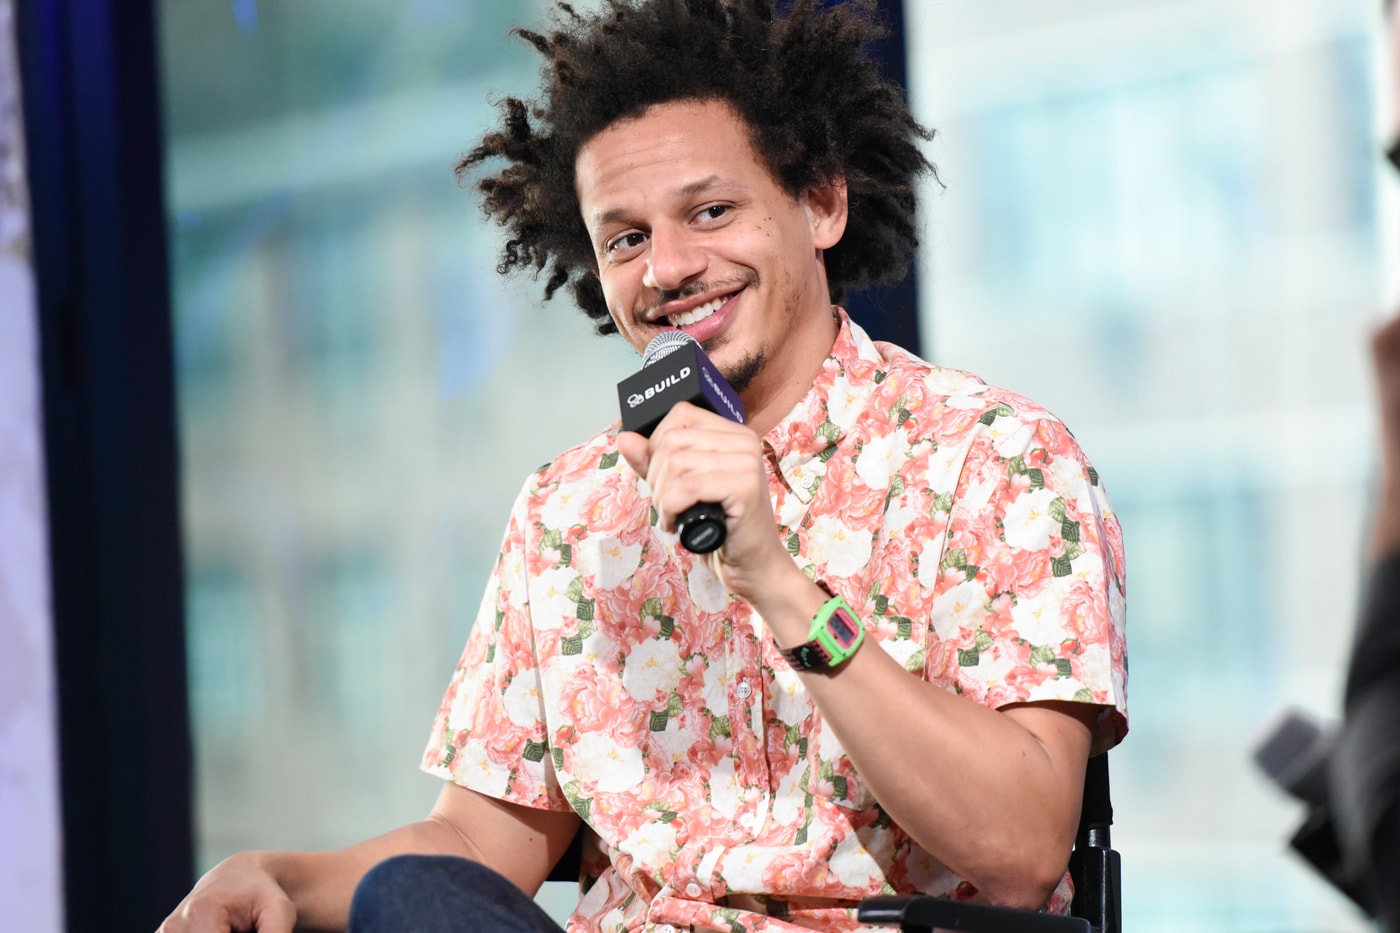 eric-andre-pitchfork-over-under-interview-video